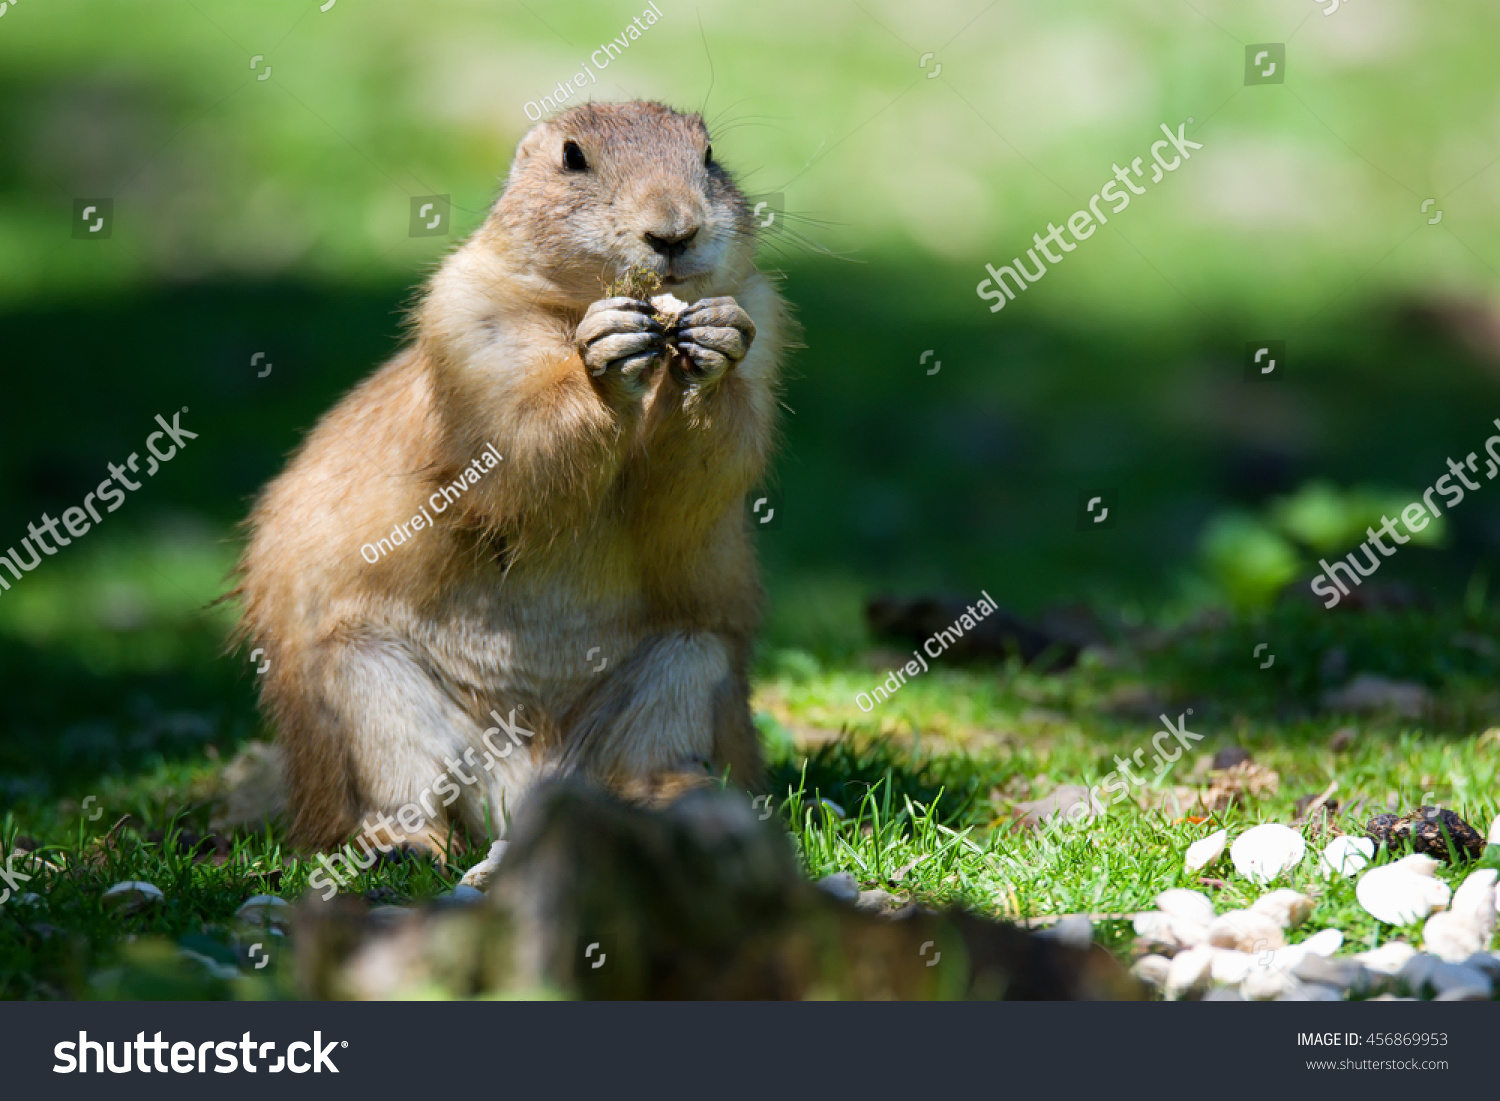 Black-tailed prairie dog (Cynomys ludovicianus) portrait of a cute pet #456869953